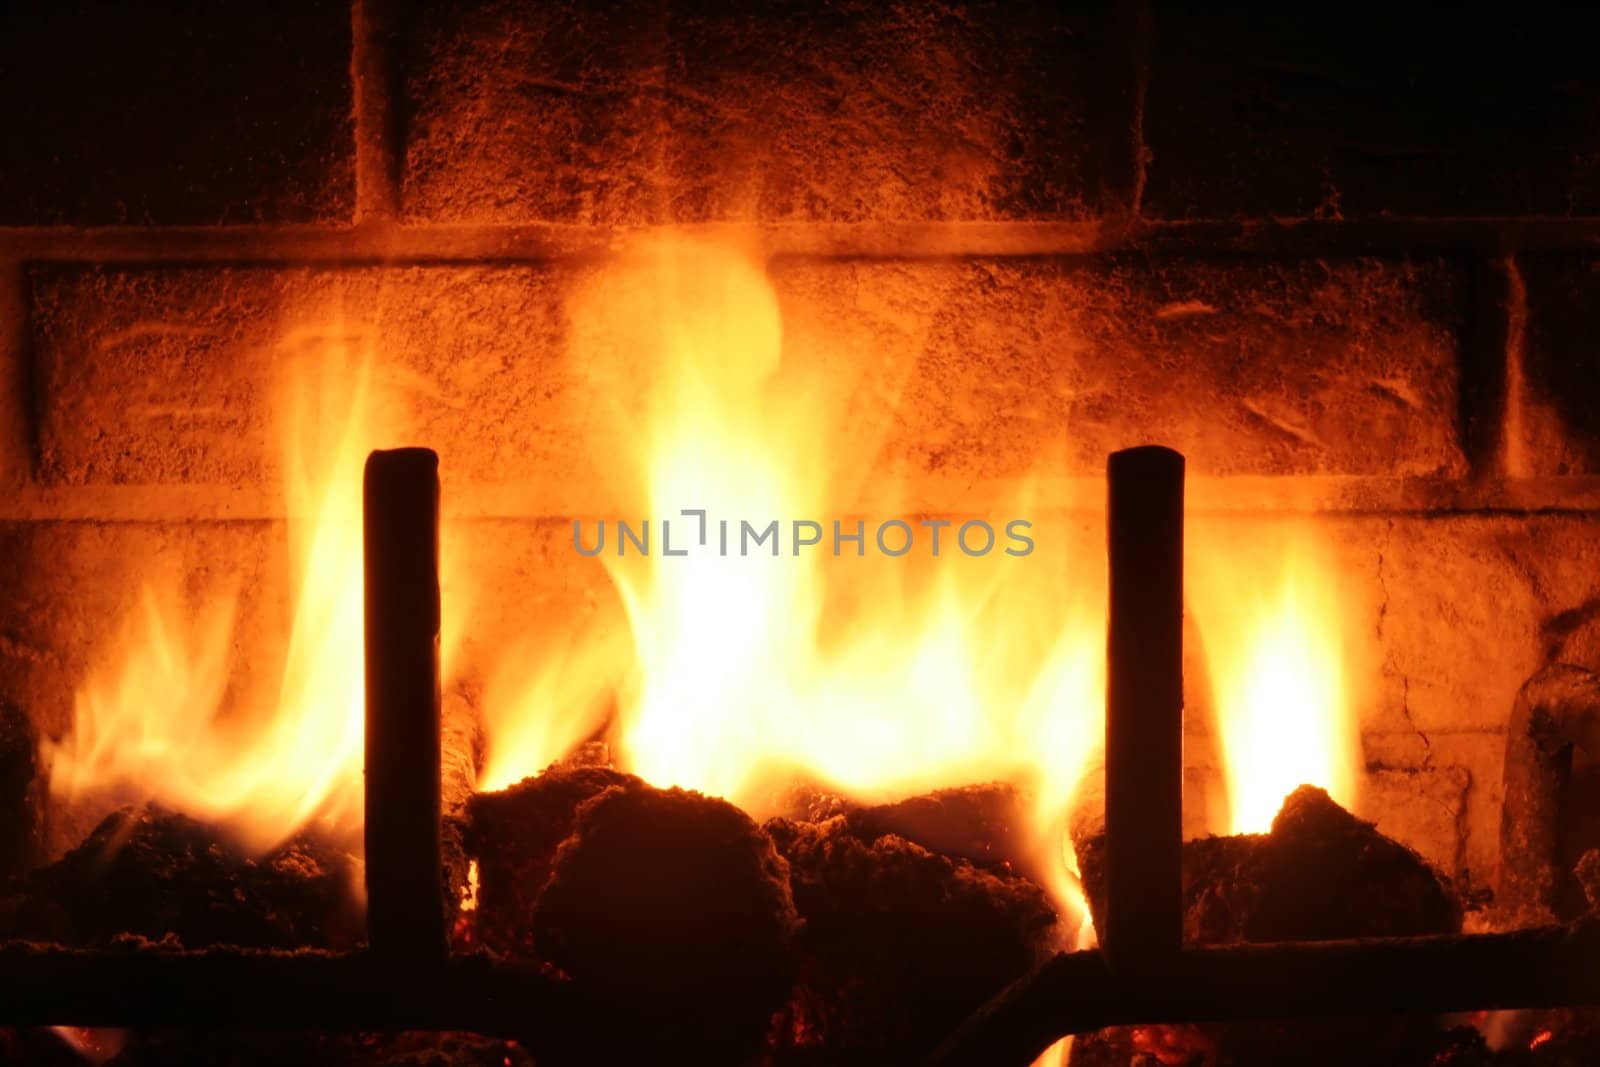 Flames light up the warm scene of a fireplace.
